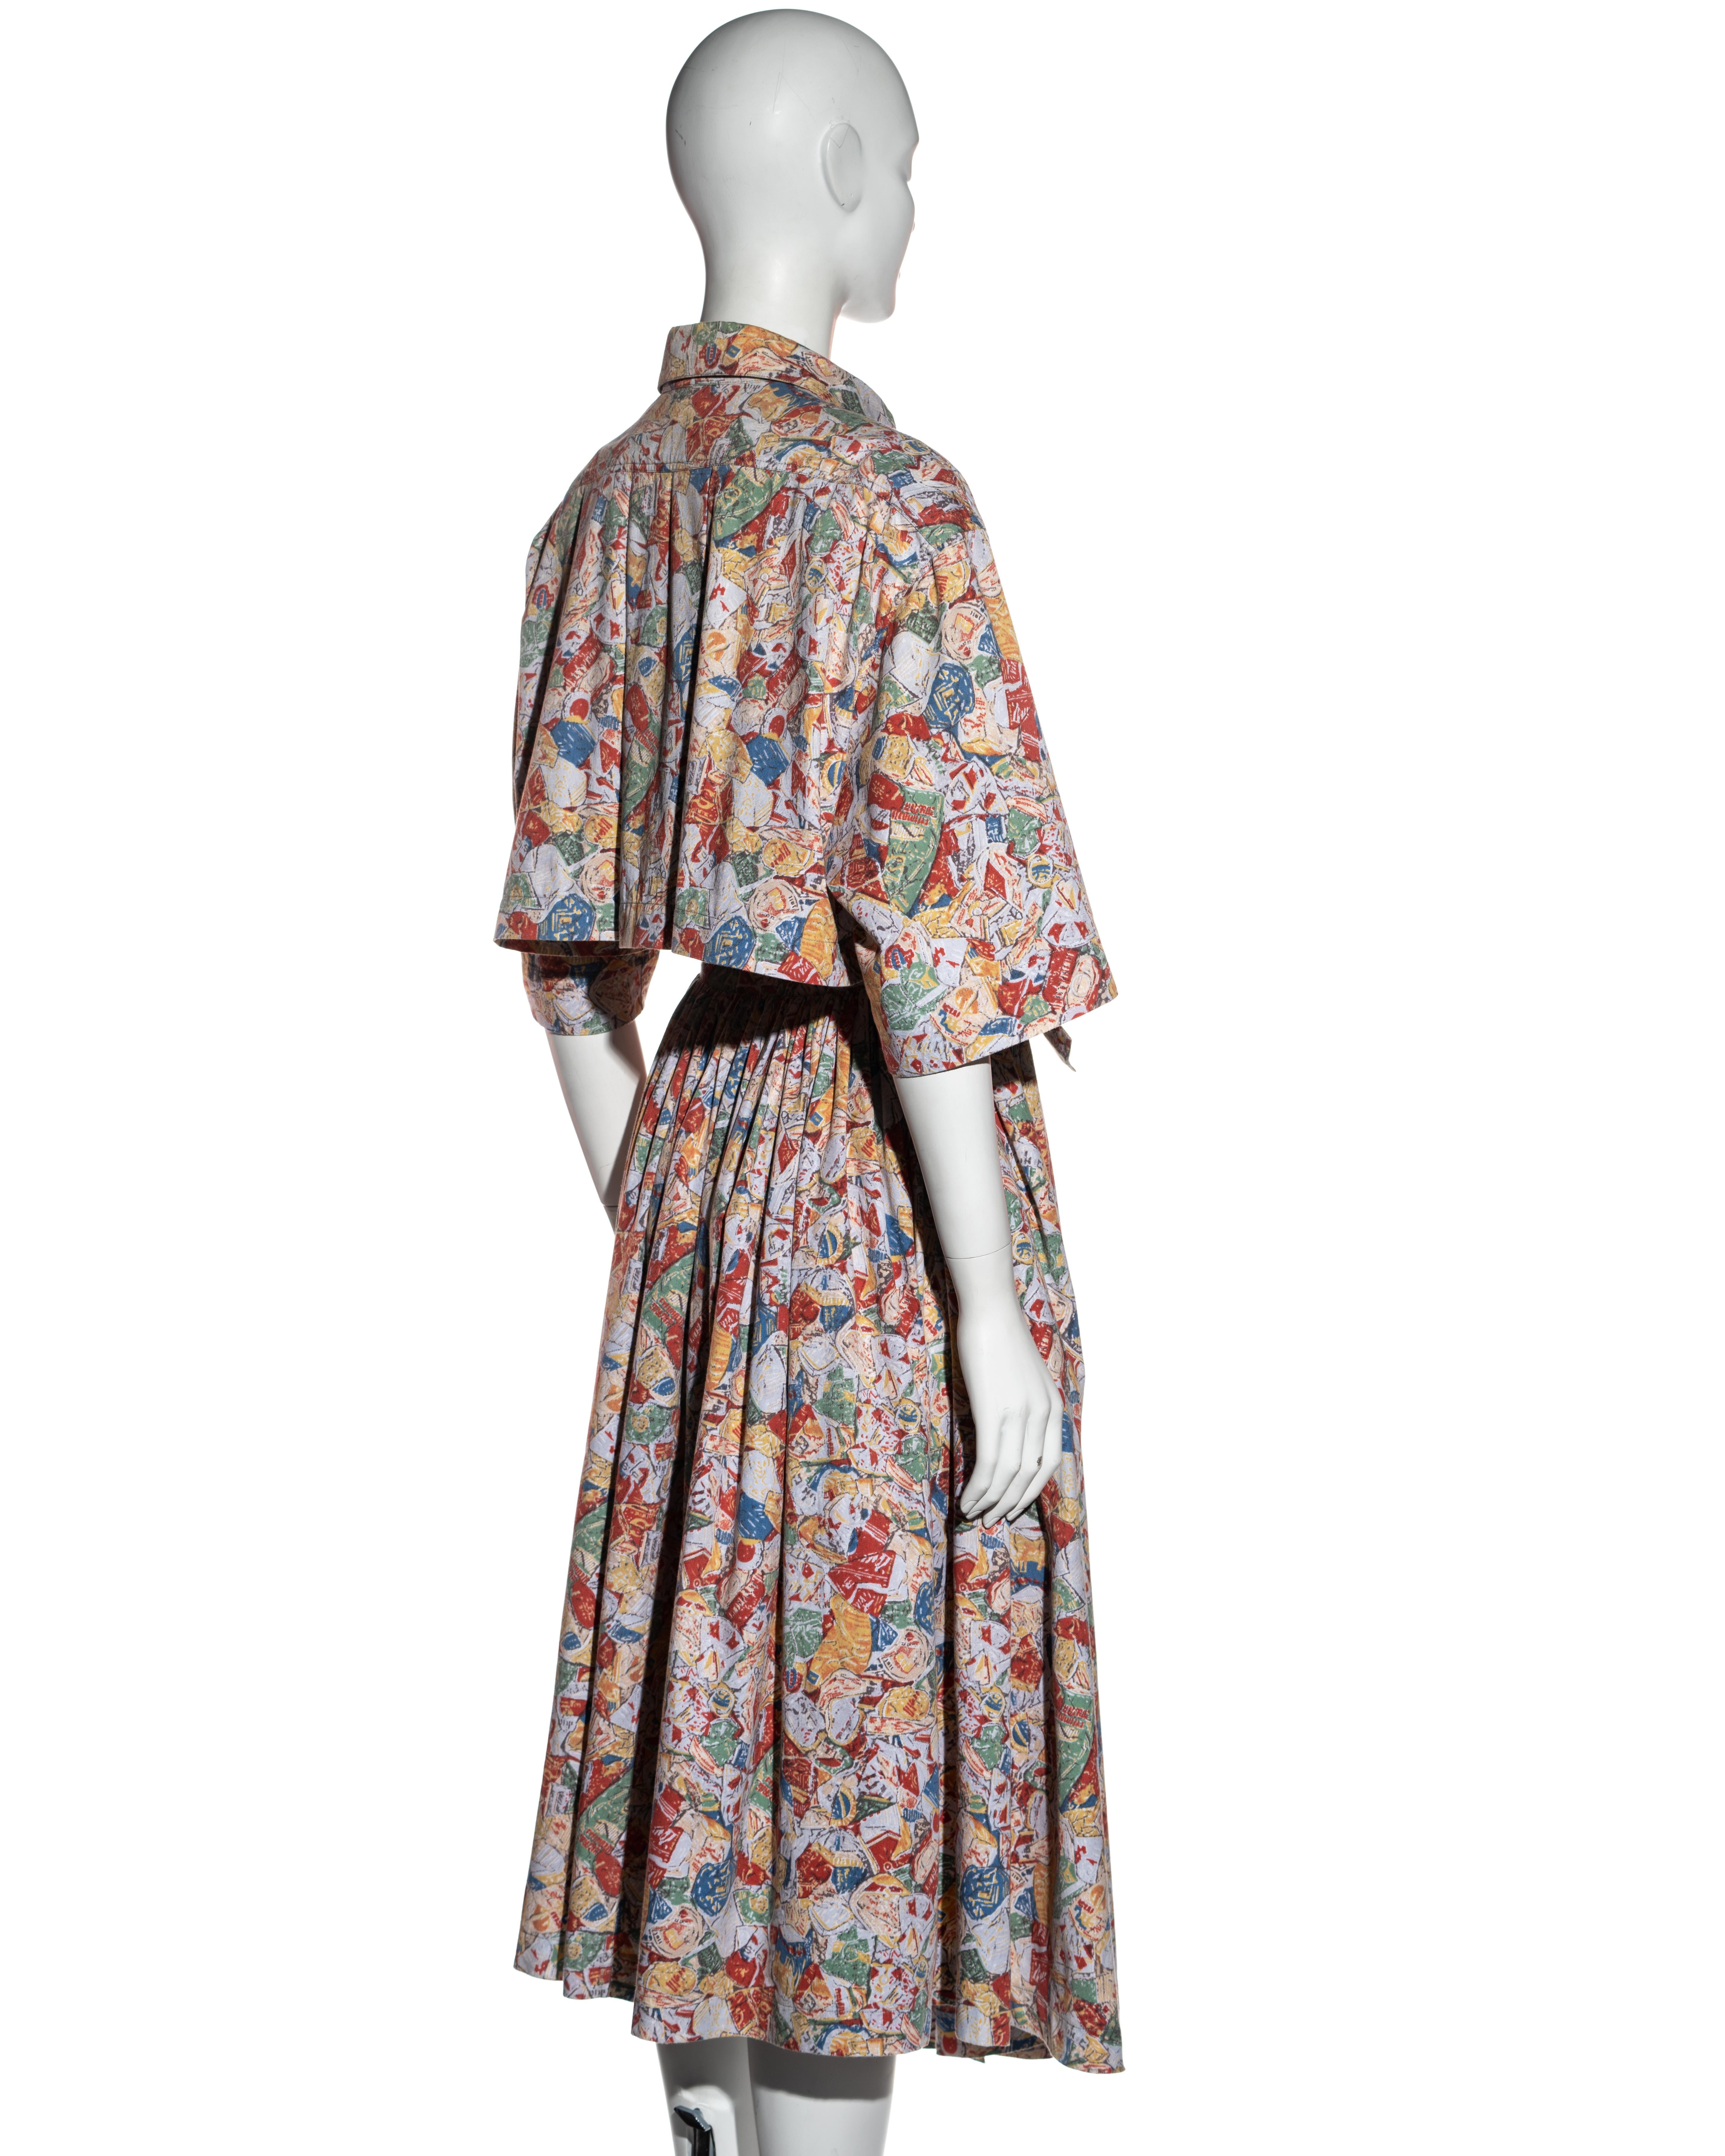 Azzedine Alaia cotton coat dress with César Baldaccini print, ss 1985 In Good Condition For Sale In London, GB